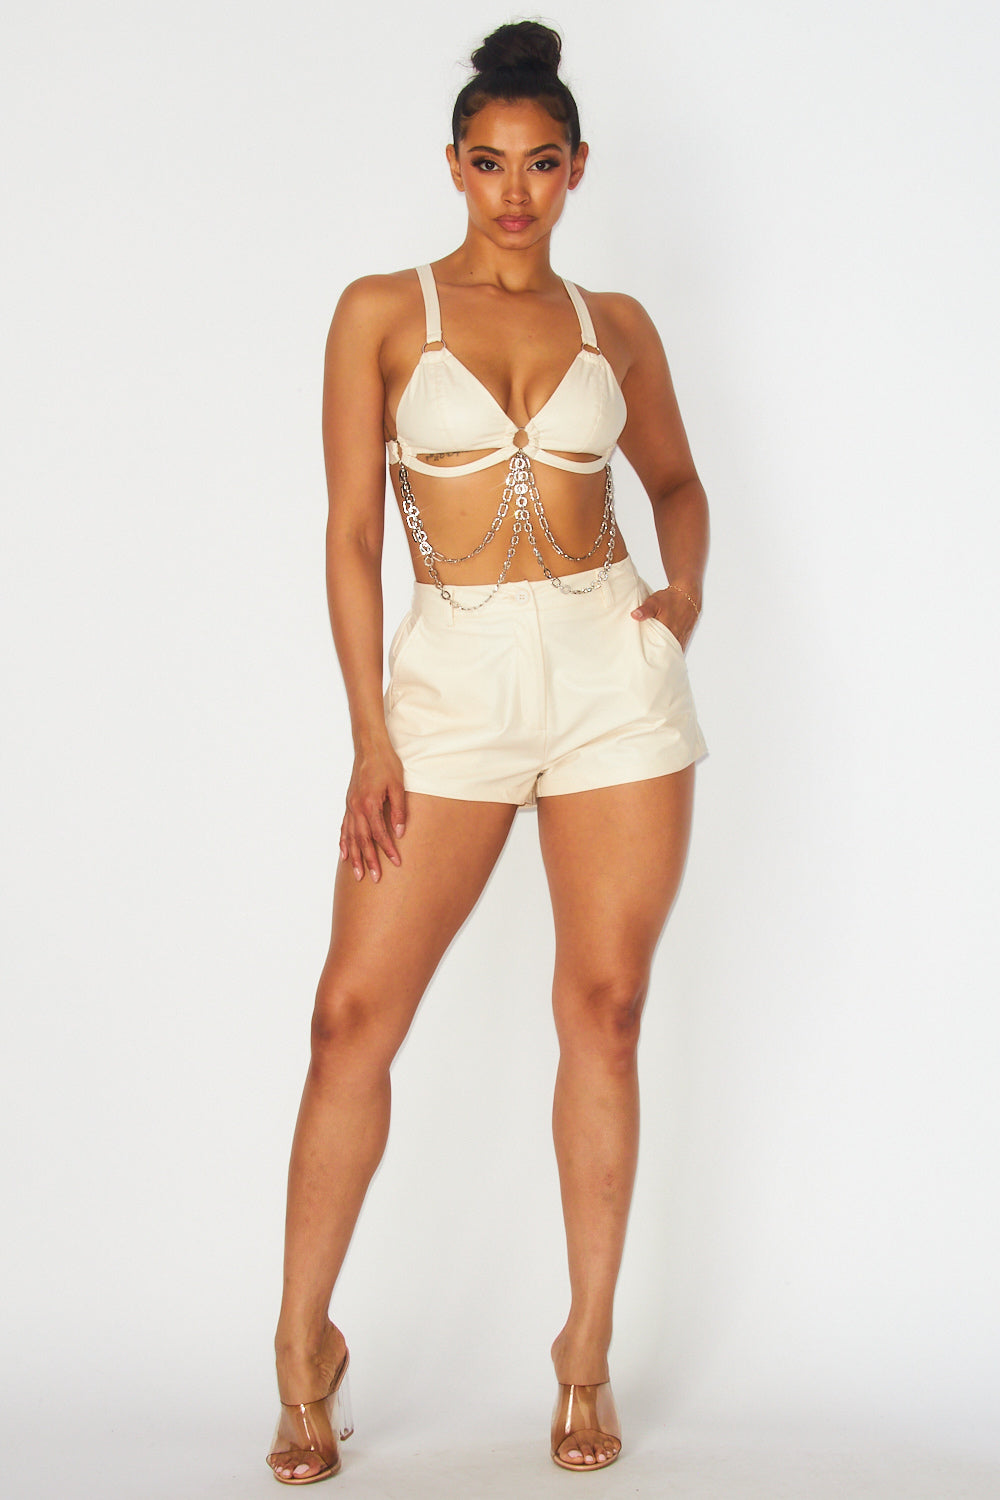 Ginny Faux Leather Chain Bra Top & Shorts Set